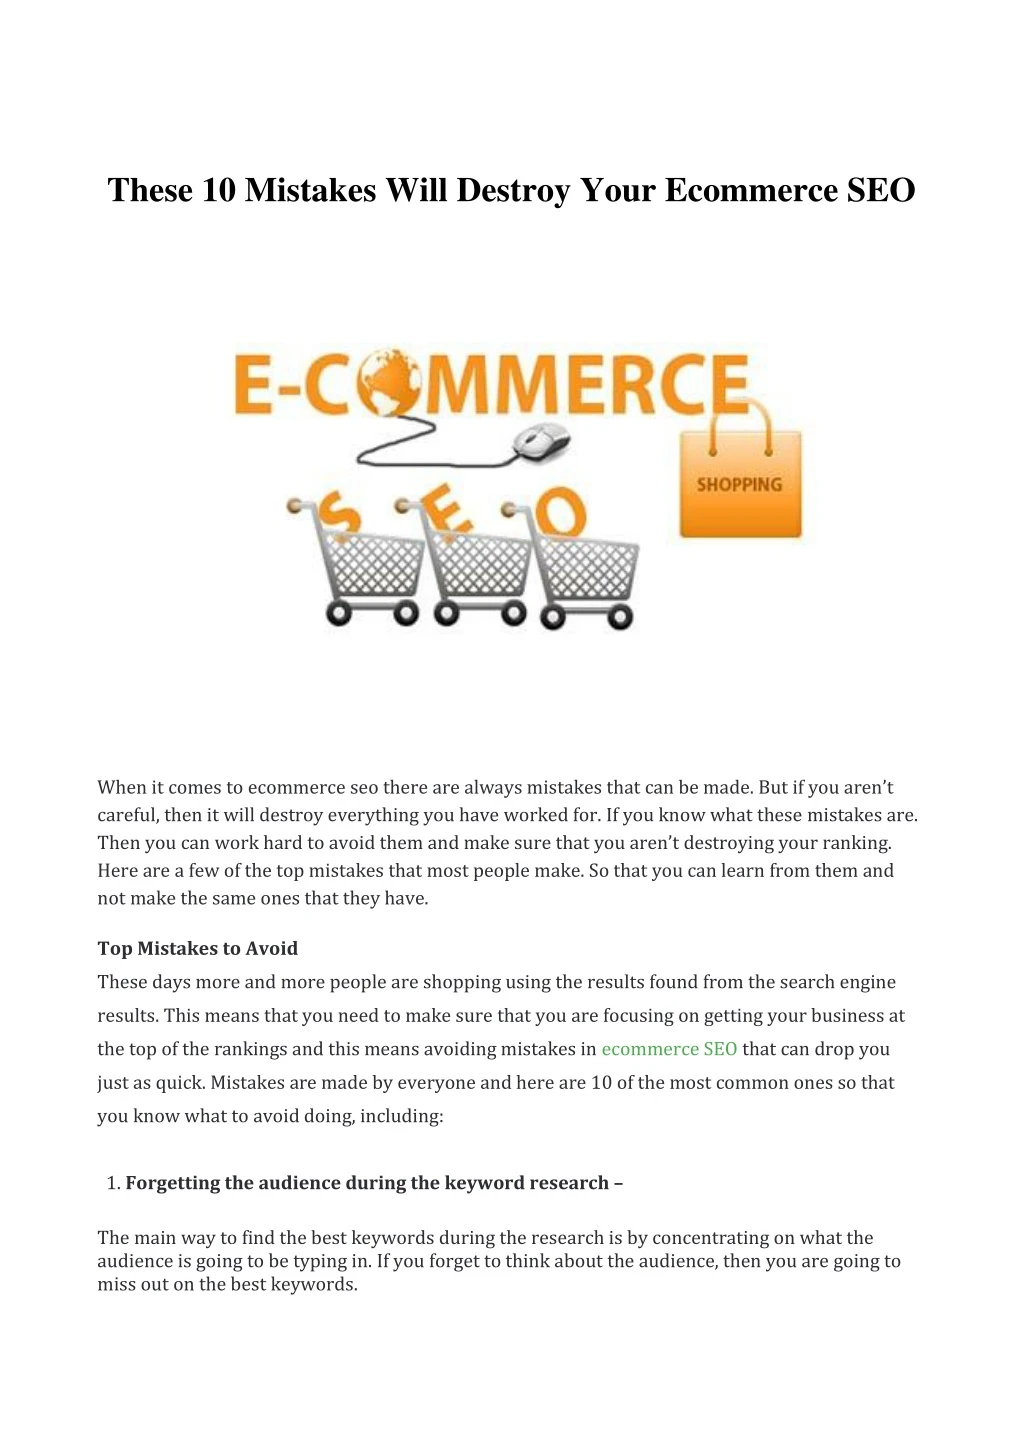 these 10 mistakes will destroy your ecommerce seo